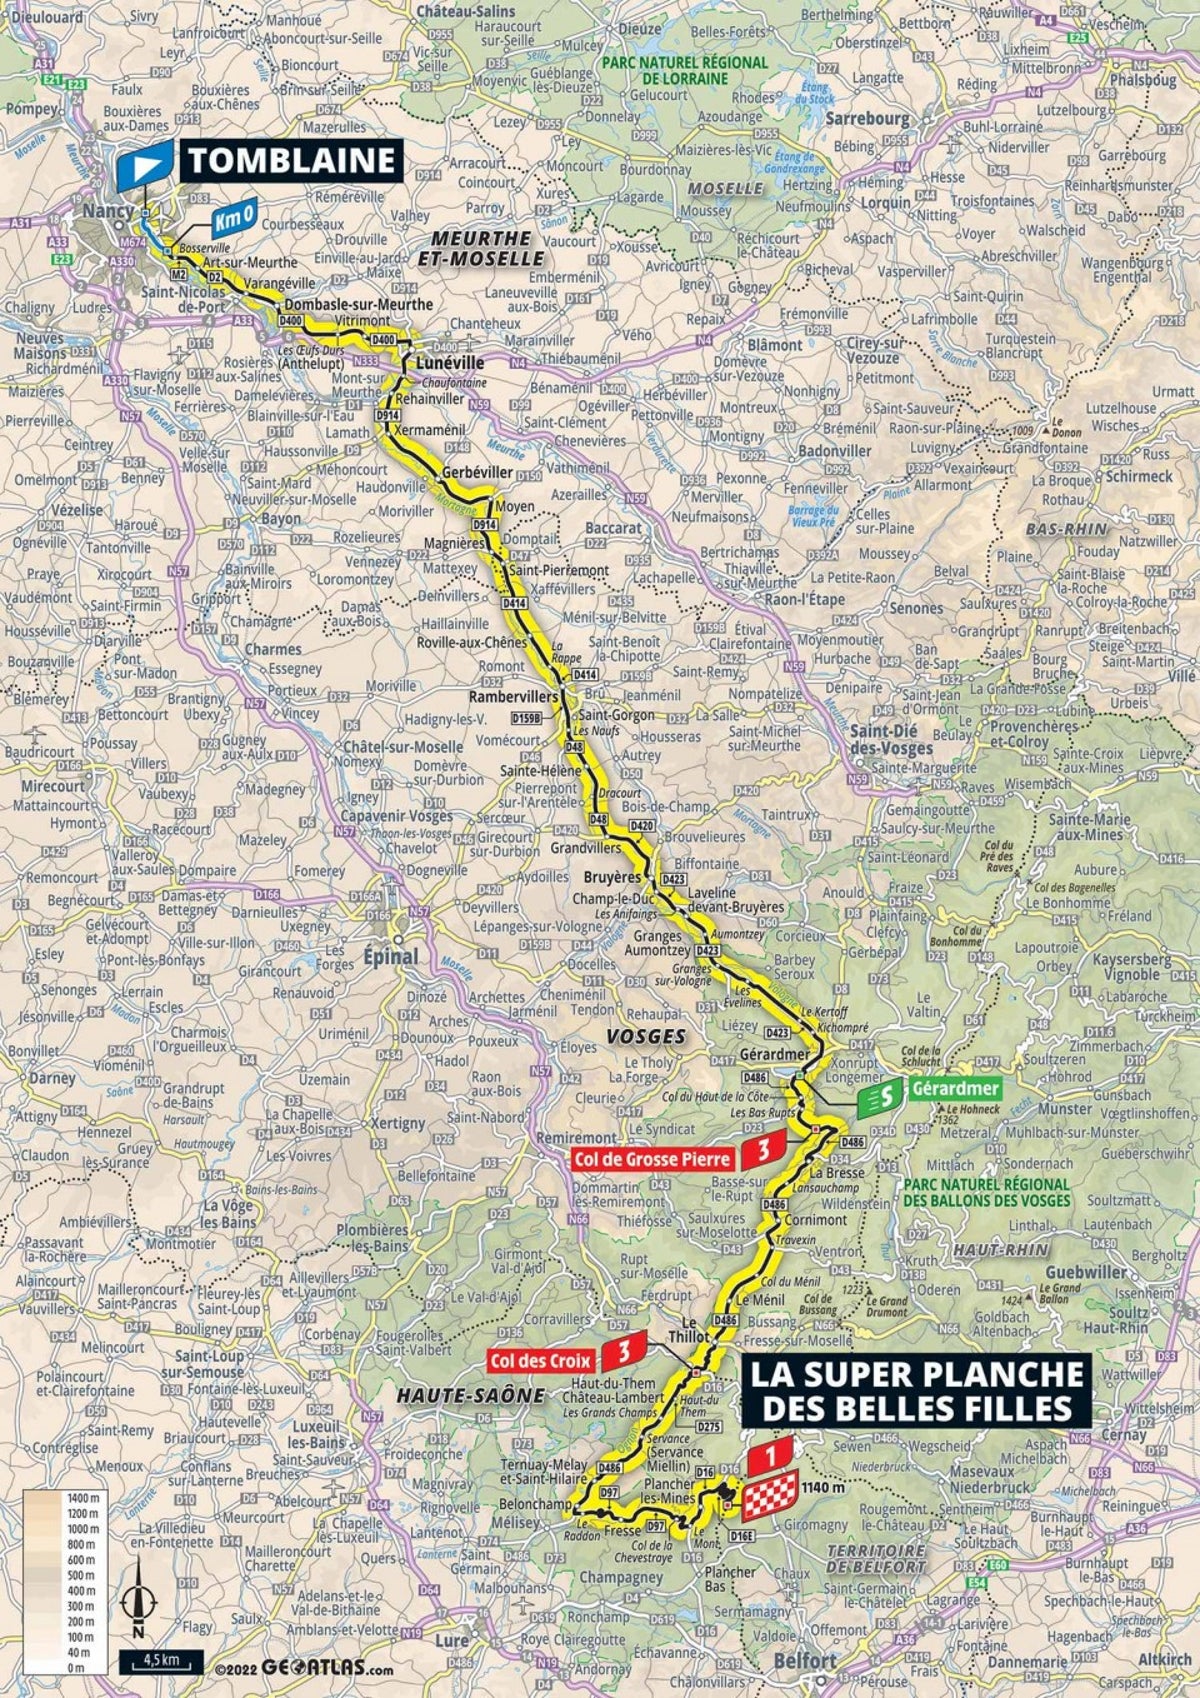 Tour de France 2022 Stage 7 preview: Route map and profile of summit finish atop Planche des Belles Filles today